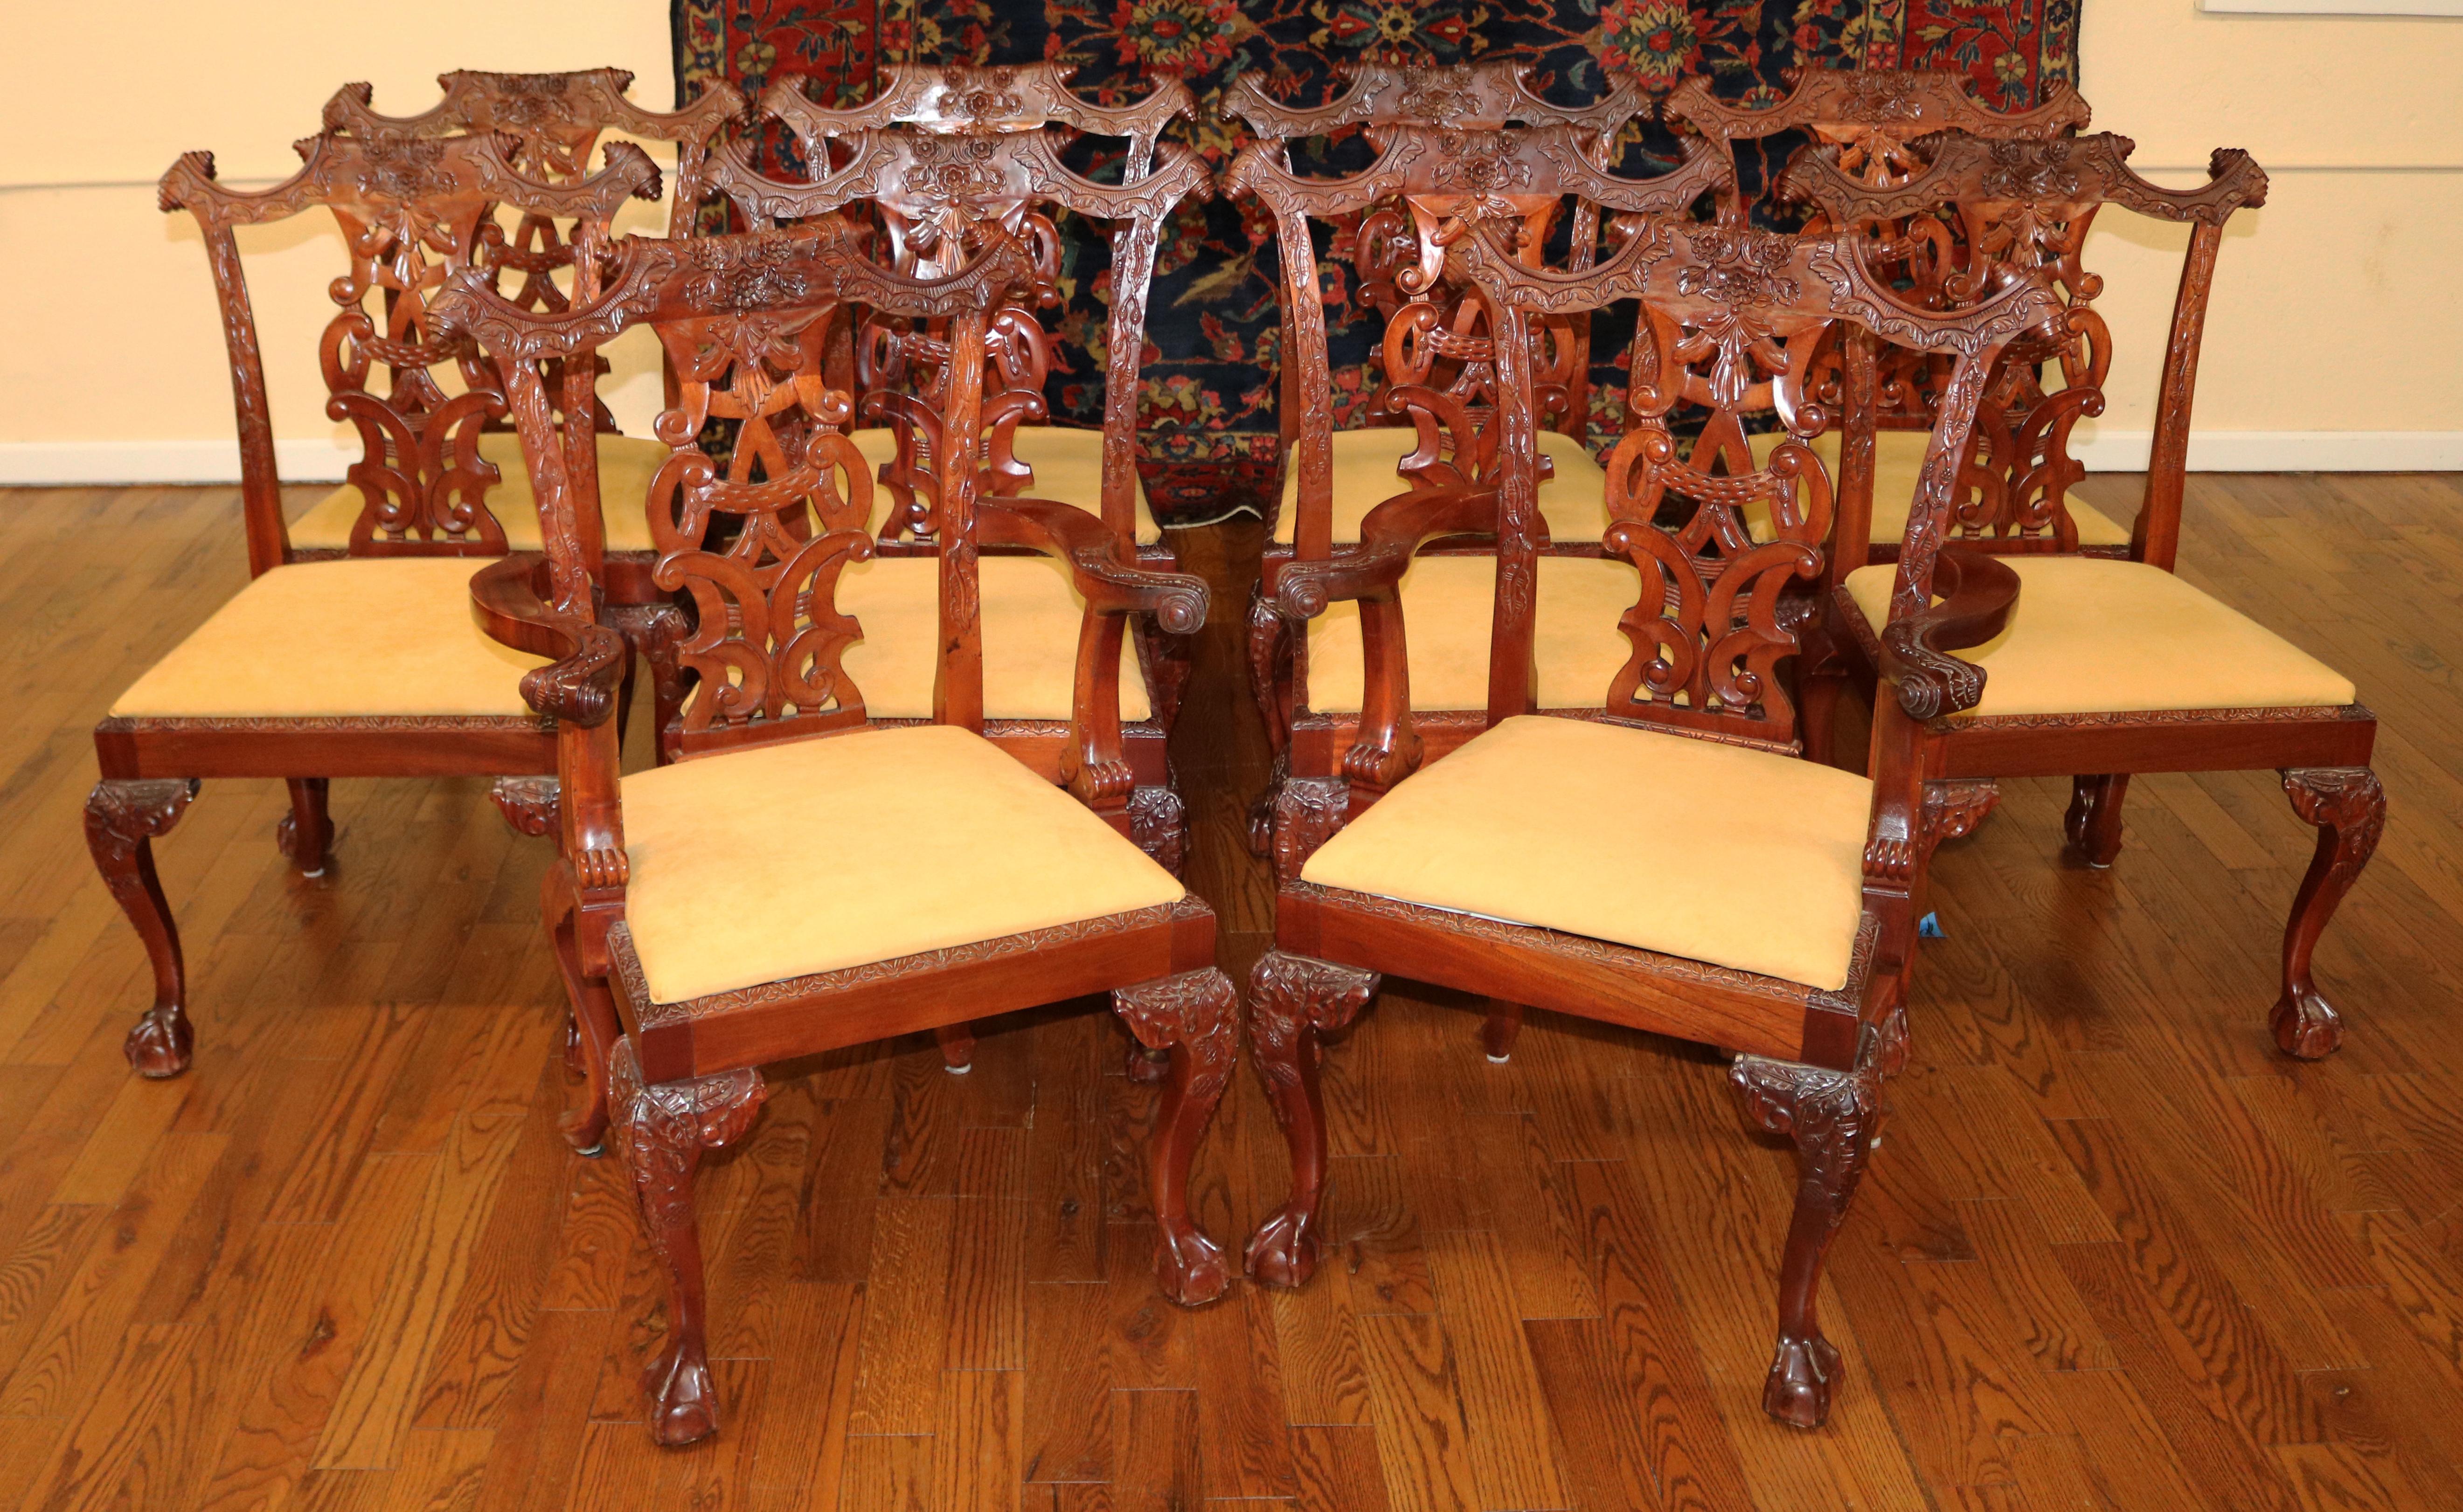 et of 10 Mahogany Irish Chippendale Style Dining Chairs Beige / Gold Fabric

Dimensions : Arm Chairs - 27